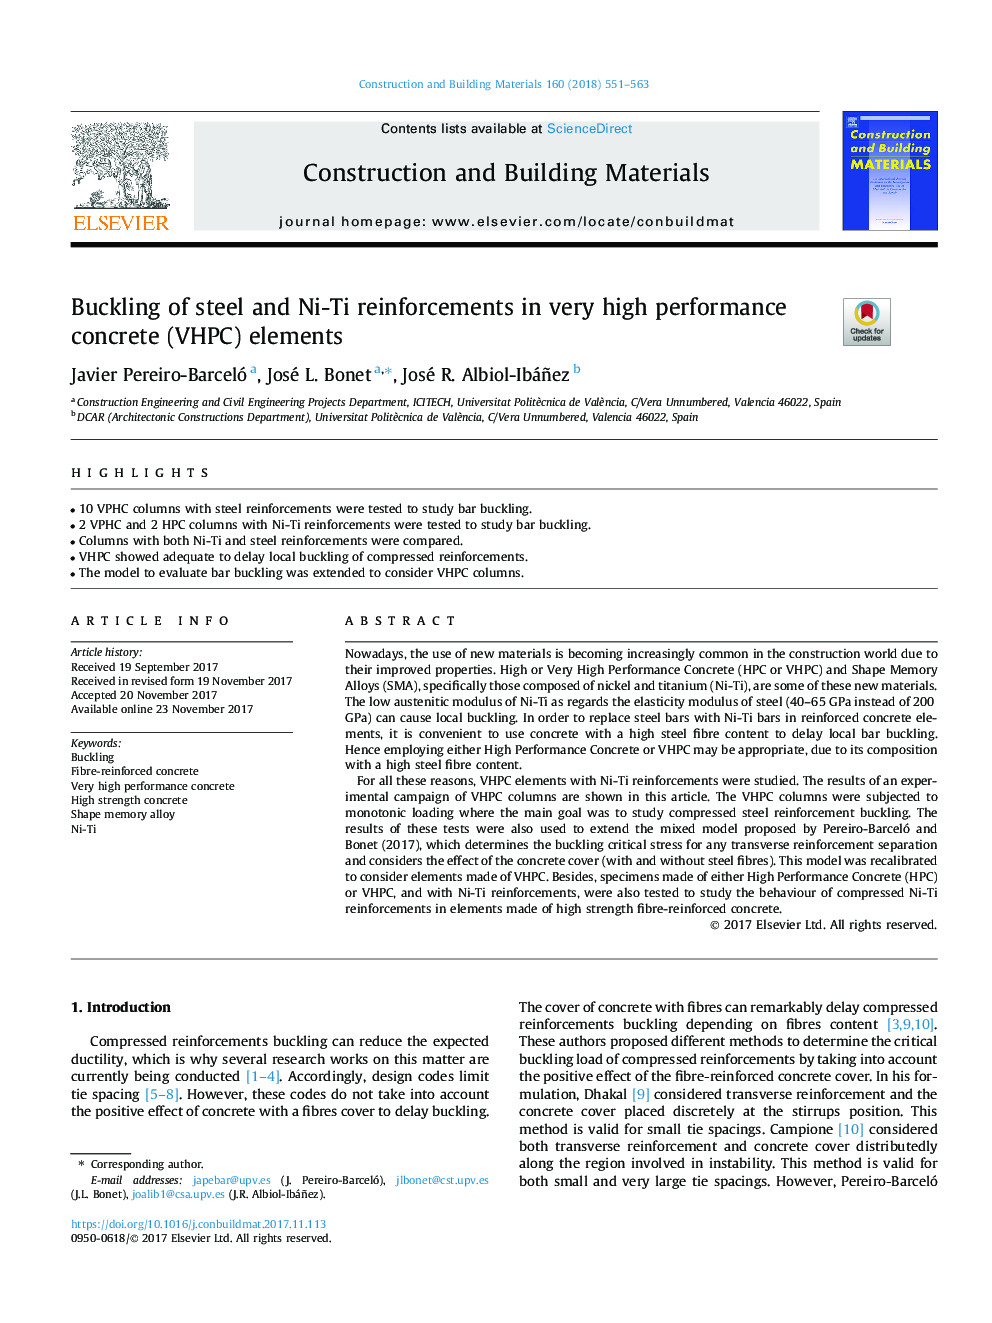 Buckling of steel and Ni-Ti reinforcements in very high performance concrete (VHPC) elements